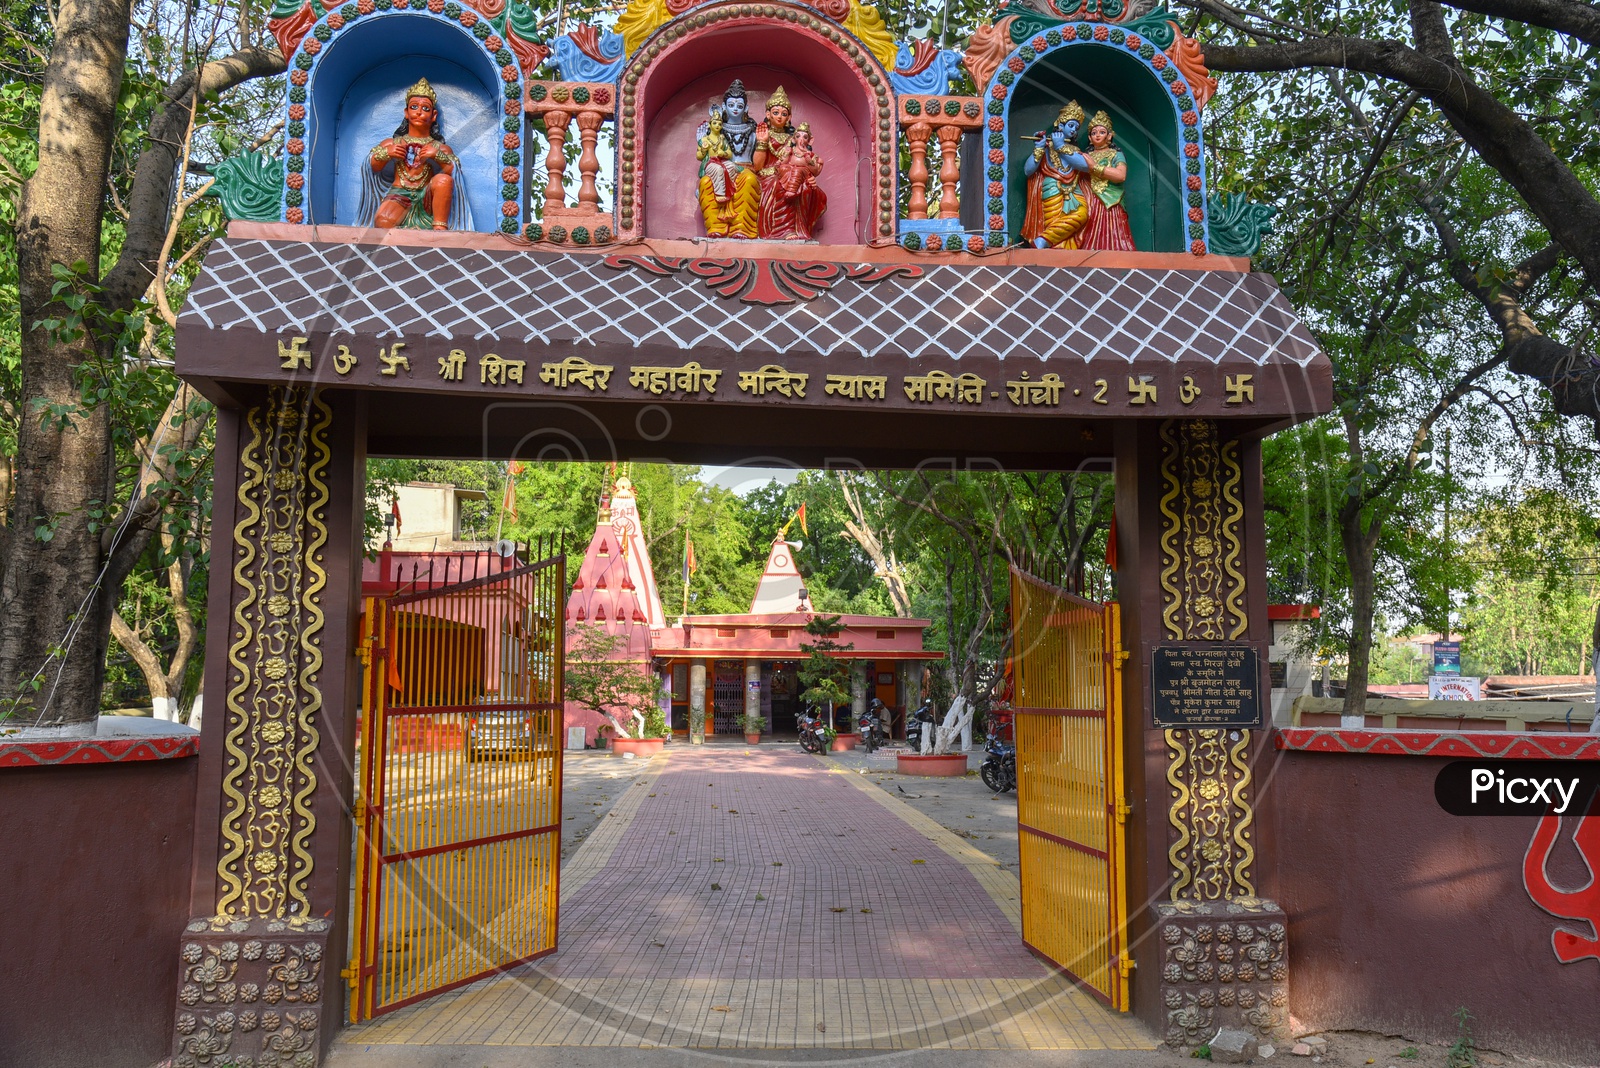 Indian Hindu Temple Entrance Arch with Hindu God sculptures